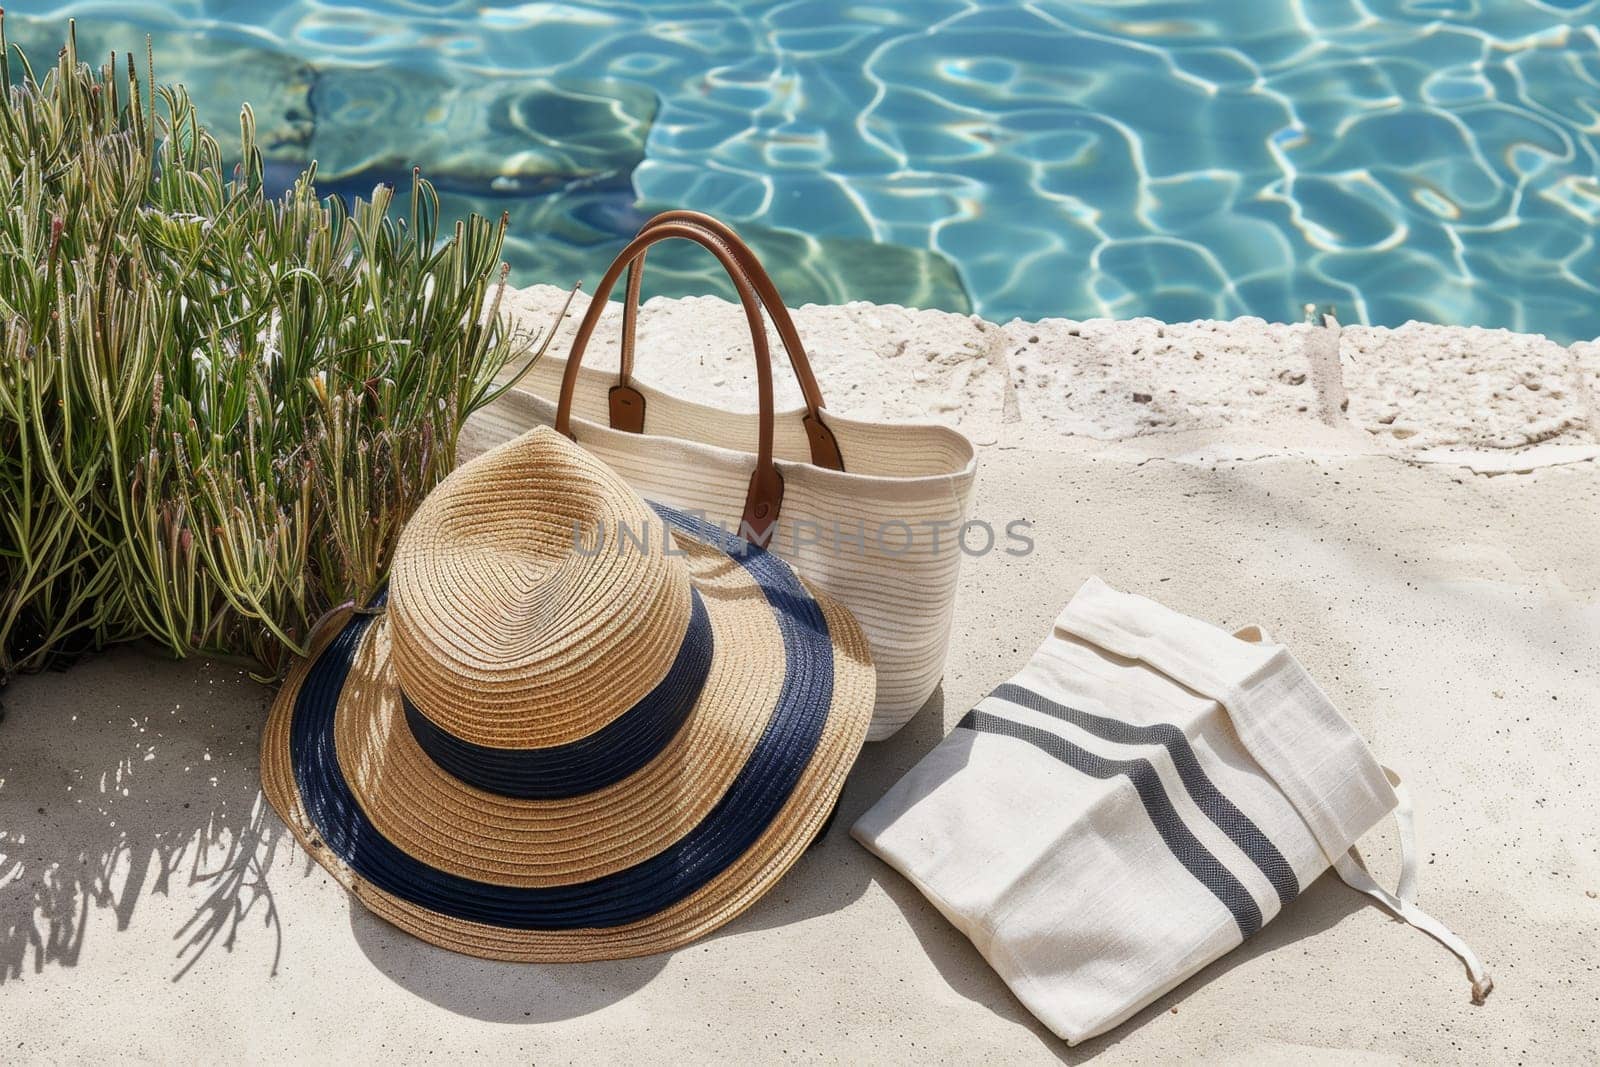 Close-up of a summer beach bag and hat on a sandy beach.